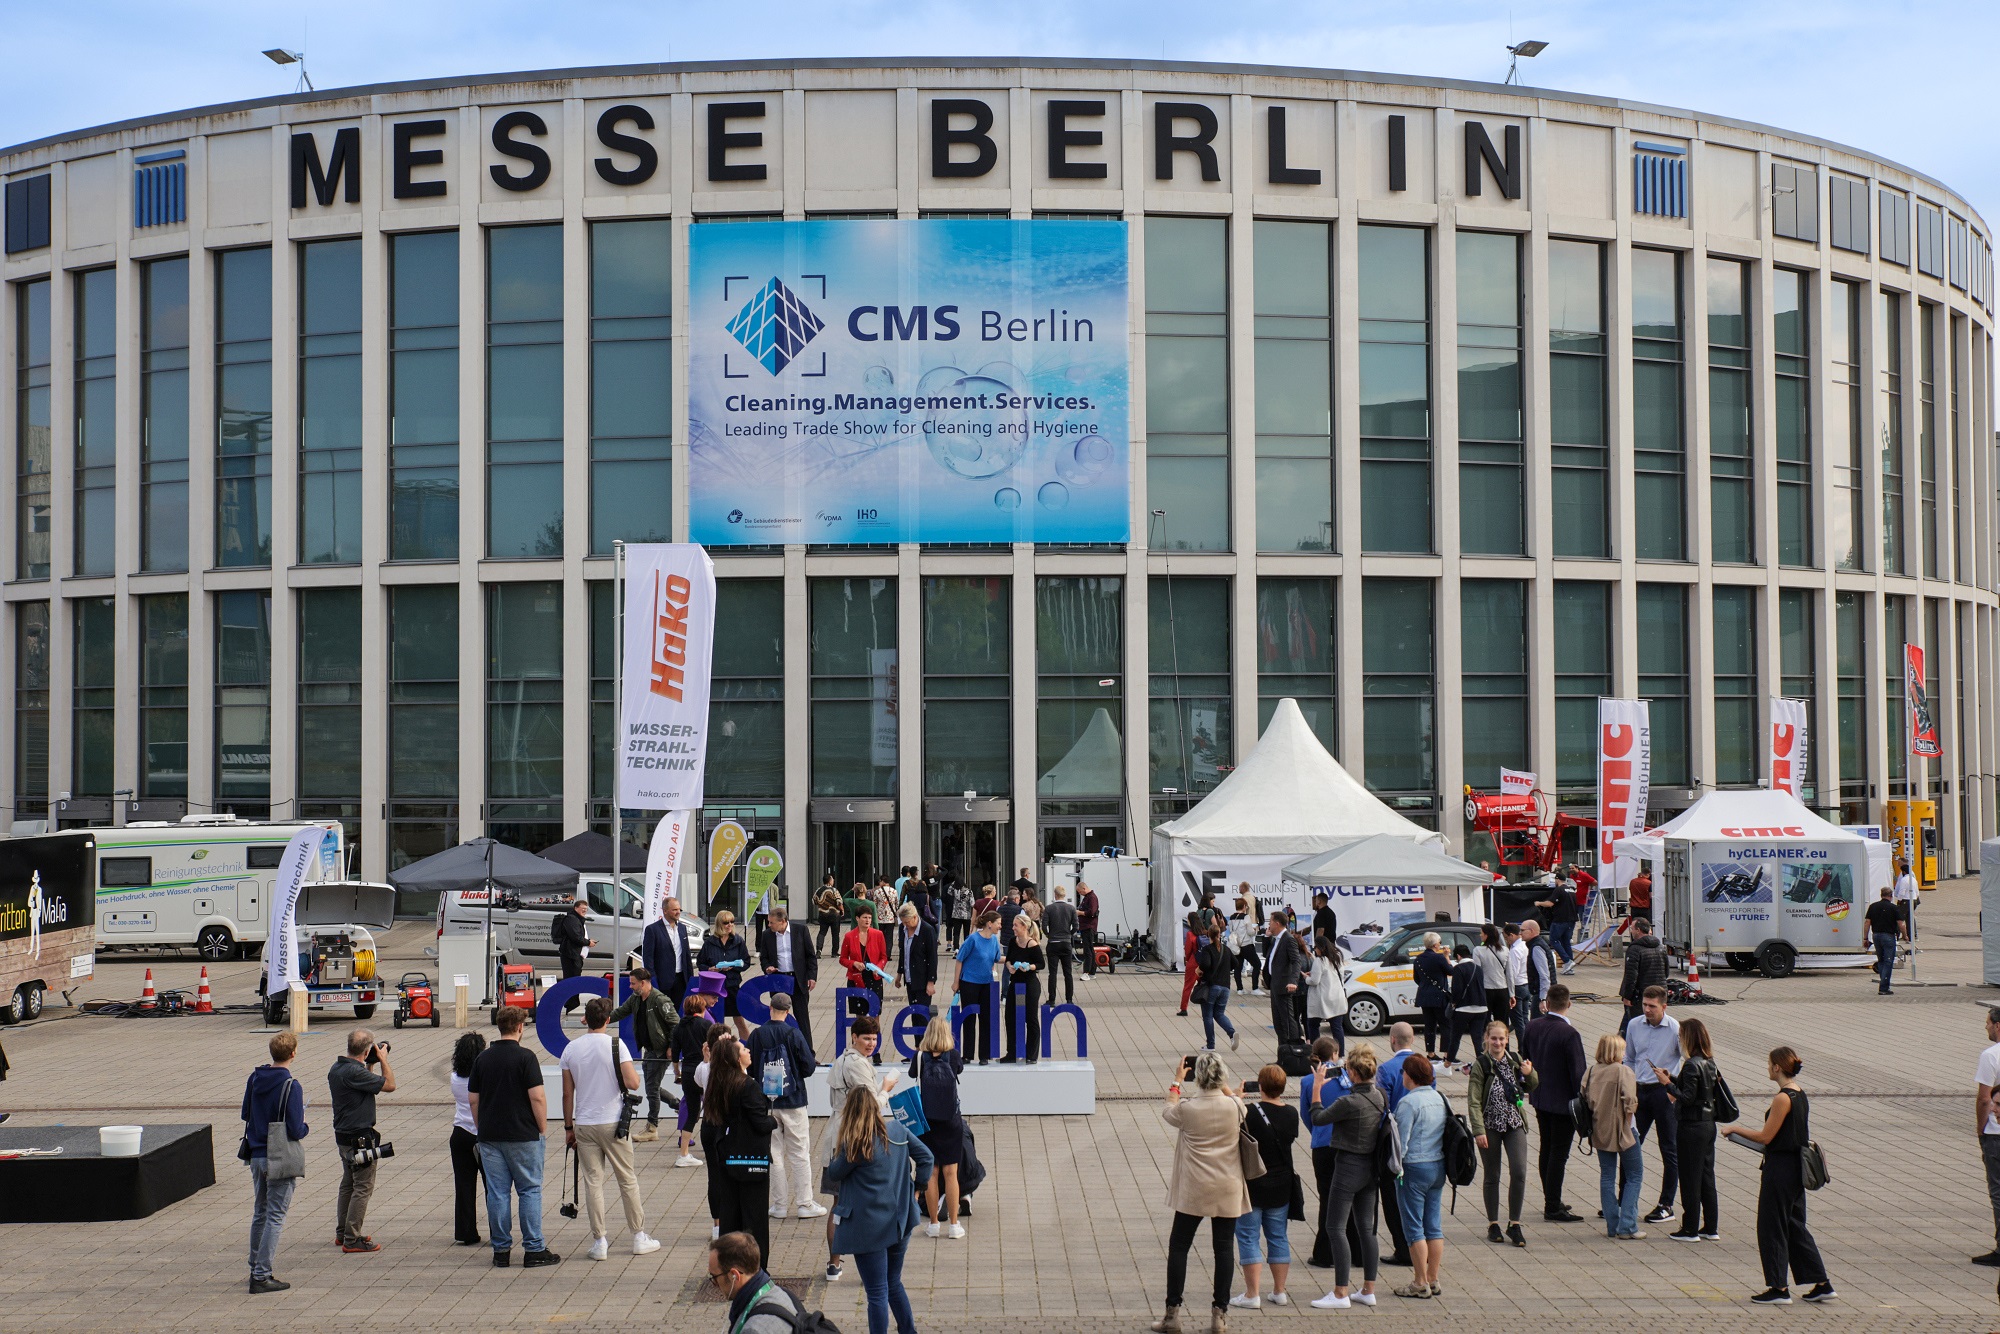 People in front of the CMS Berlin entrance